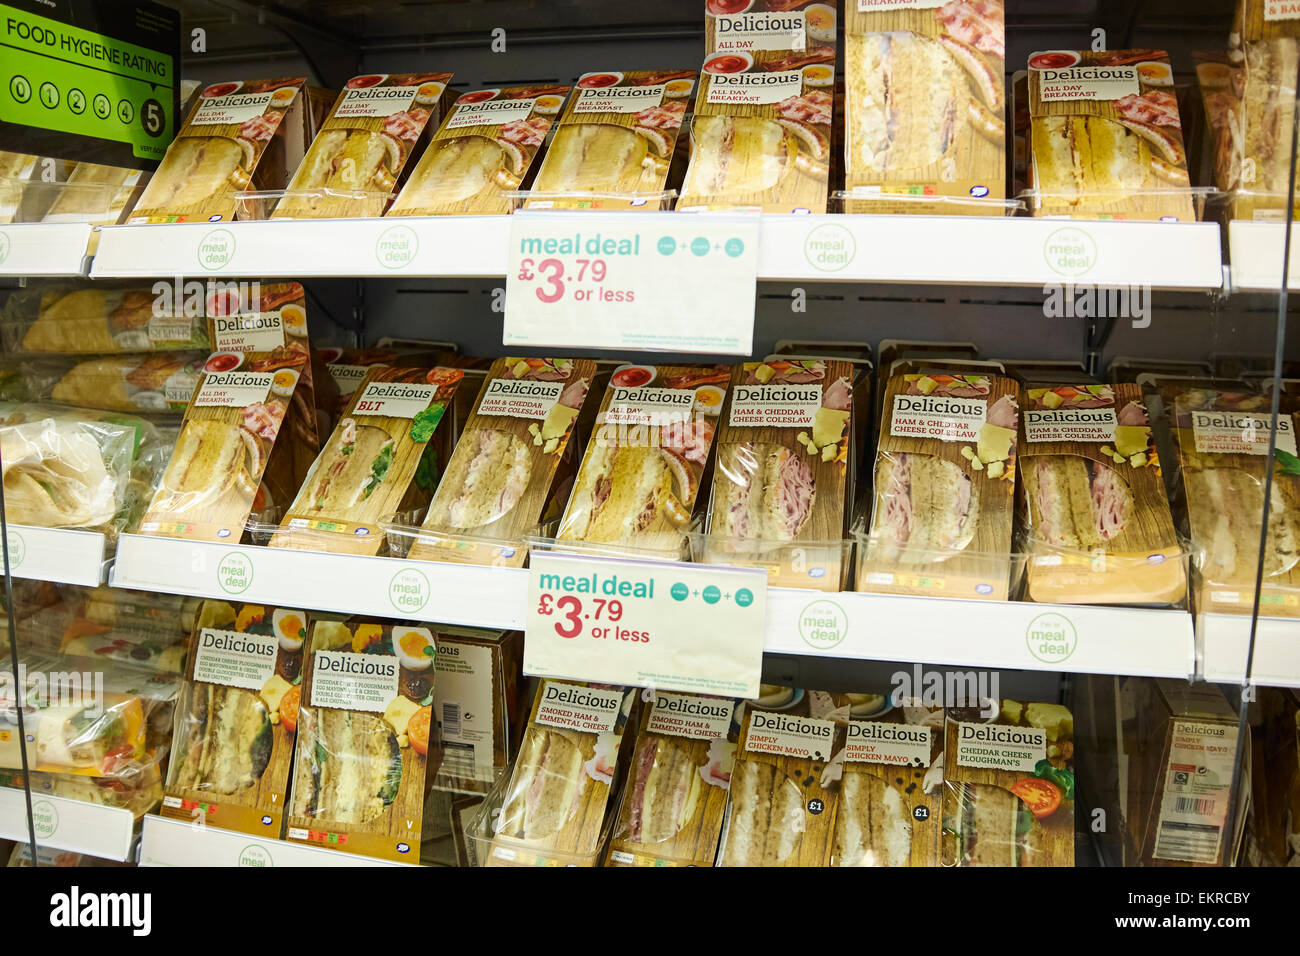 Sandwiches On Sale At Boots Health And Beauty Shop Birmingham Airport UK Stock Photo